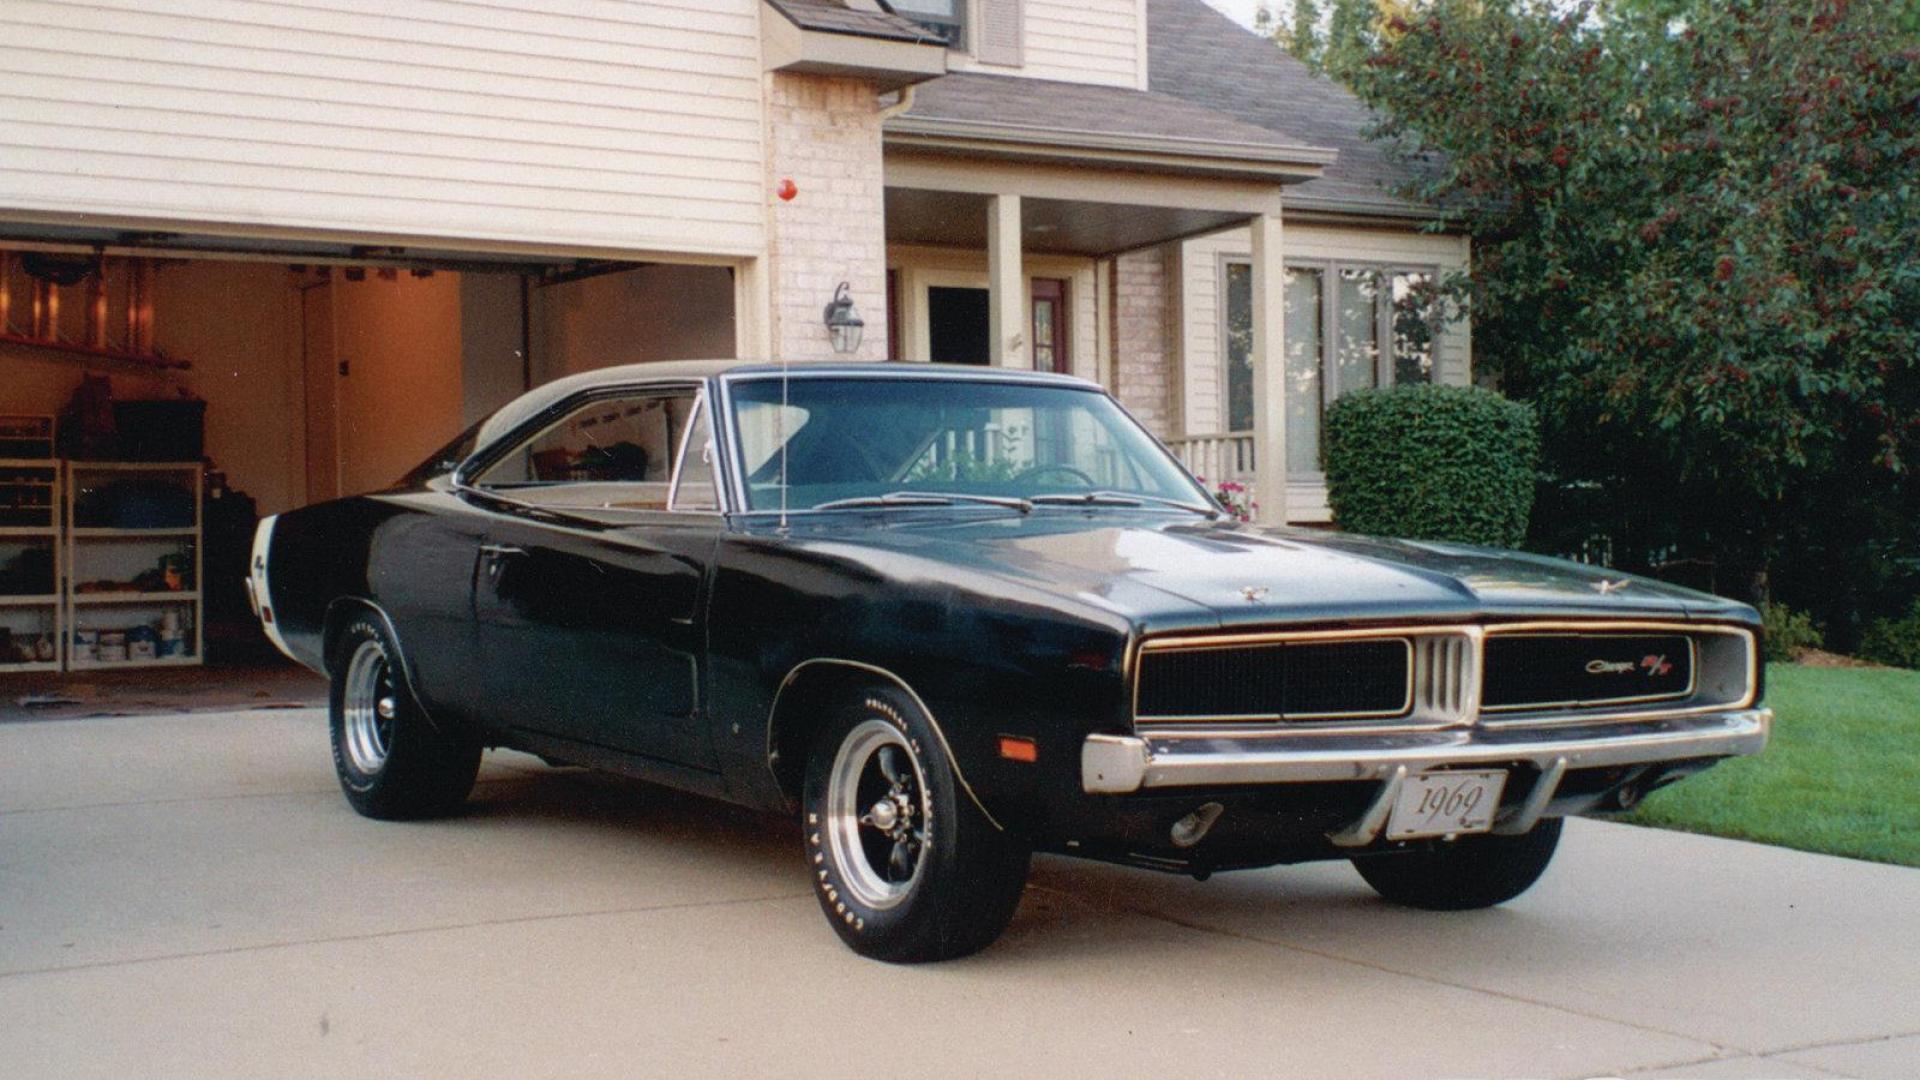 1969 Dodge Charger Rt Wallpaper   image 119